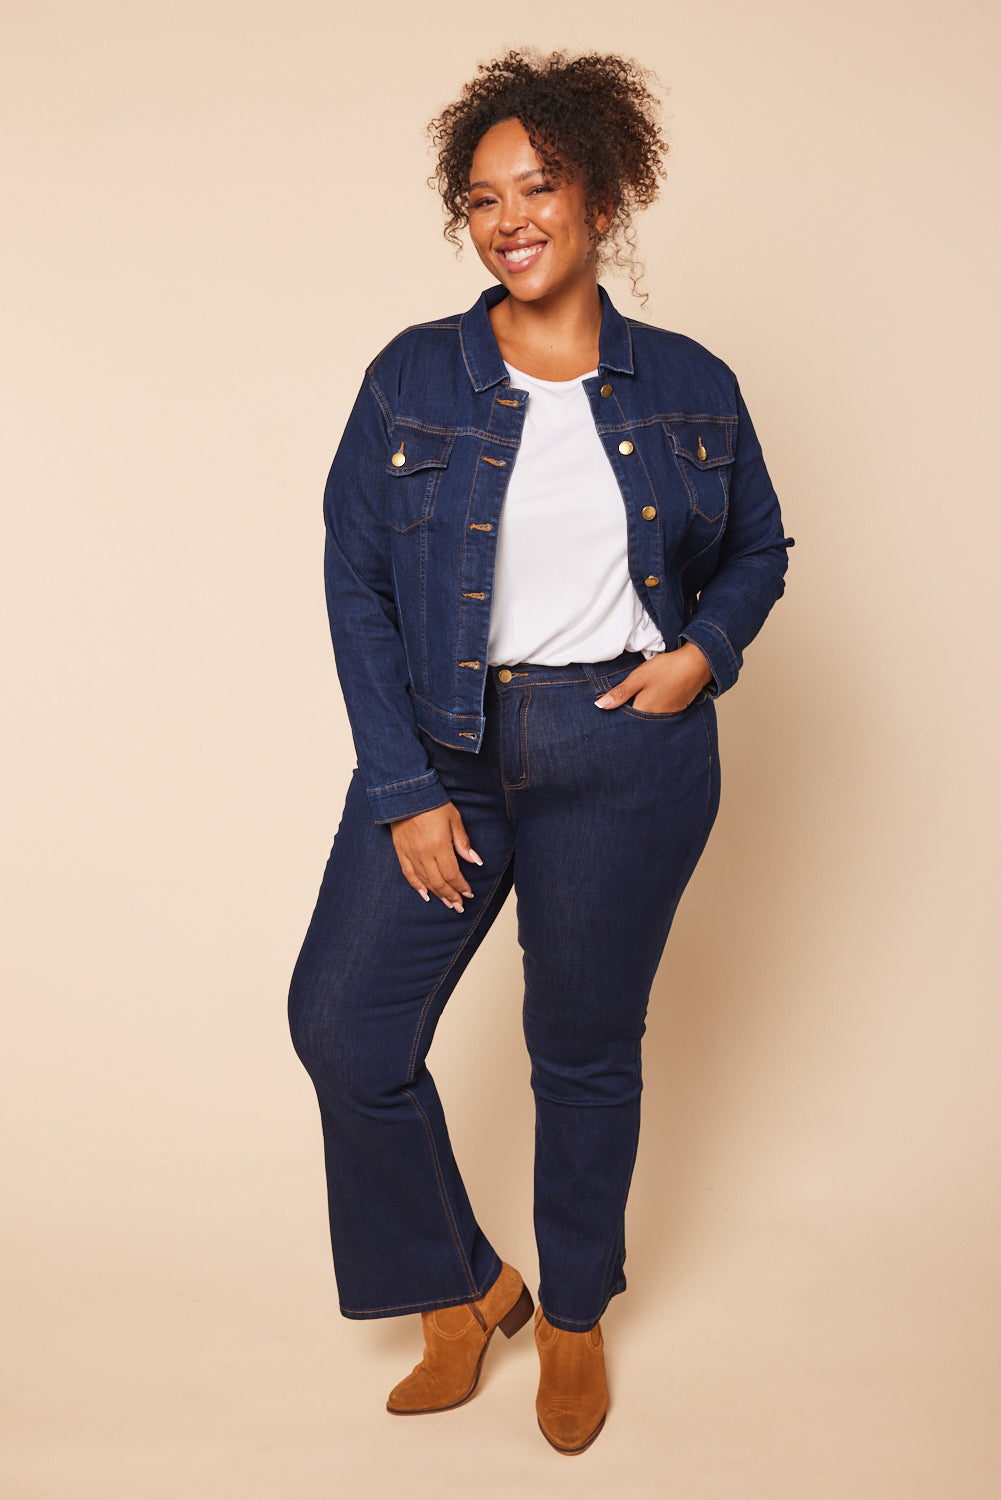 Buy Plus Size Women MOM Fit (Baggie Fit) Pure Denim Jeans - HIGH Rise-  Faded Ice Blue Color -Light Stretch Fabric - Waist Size 36